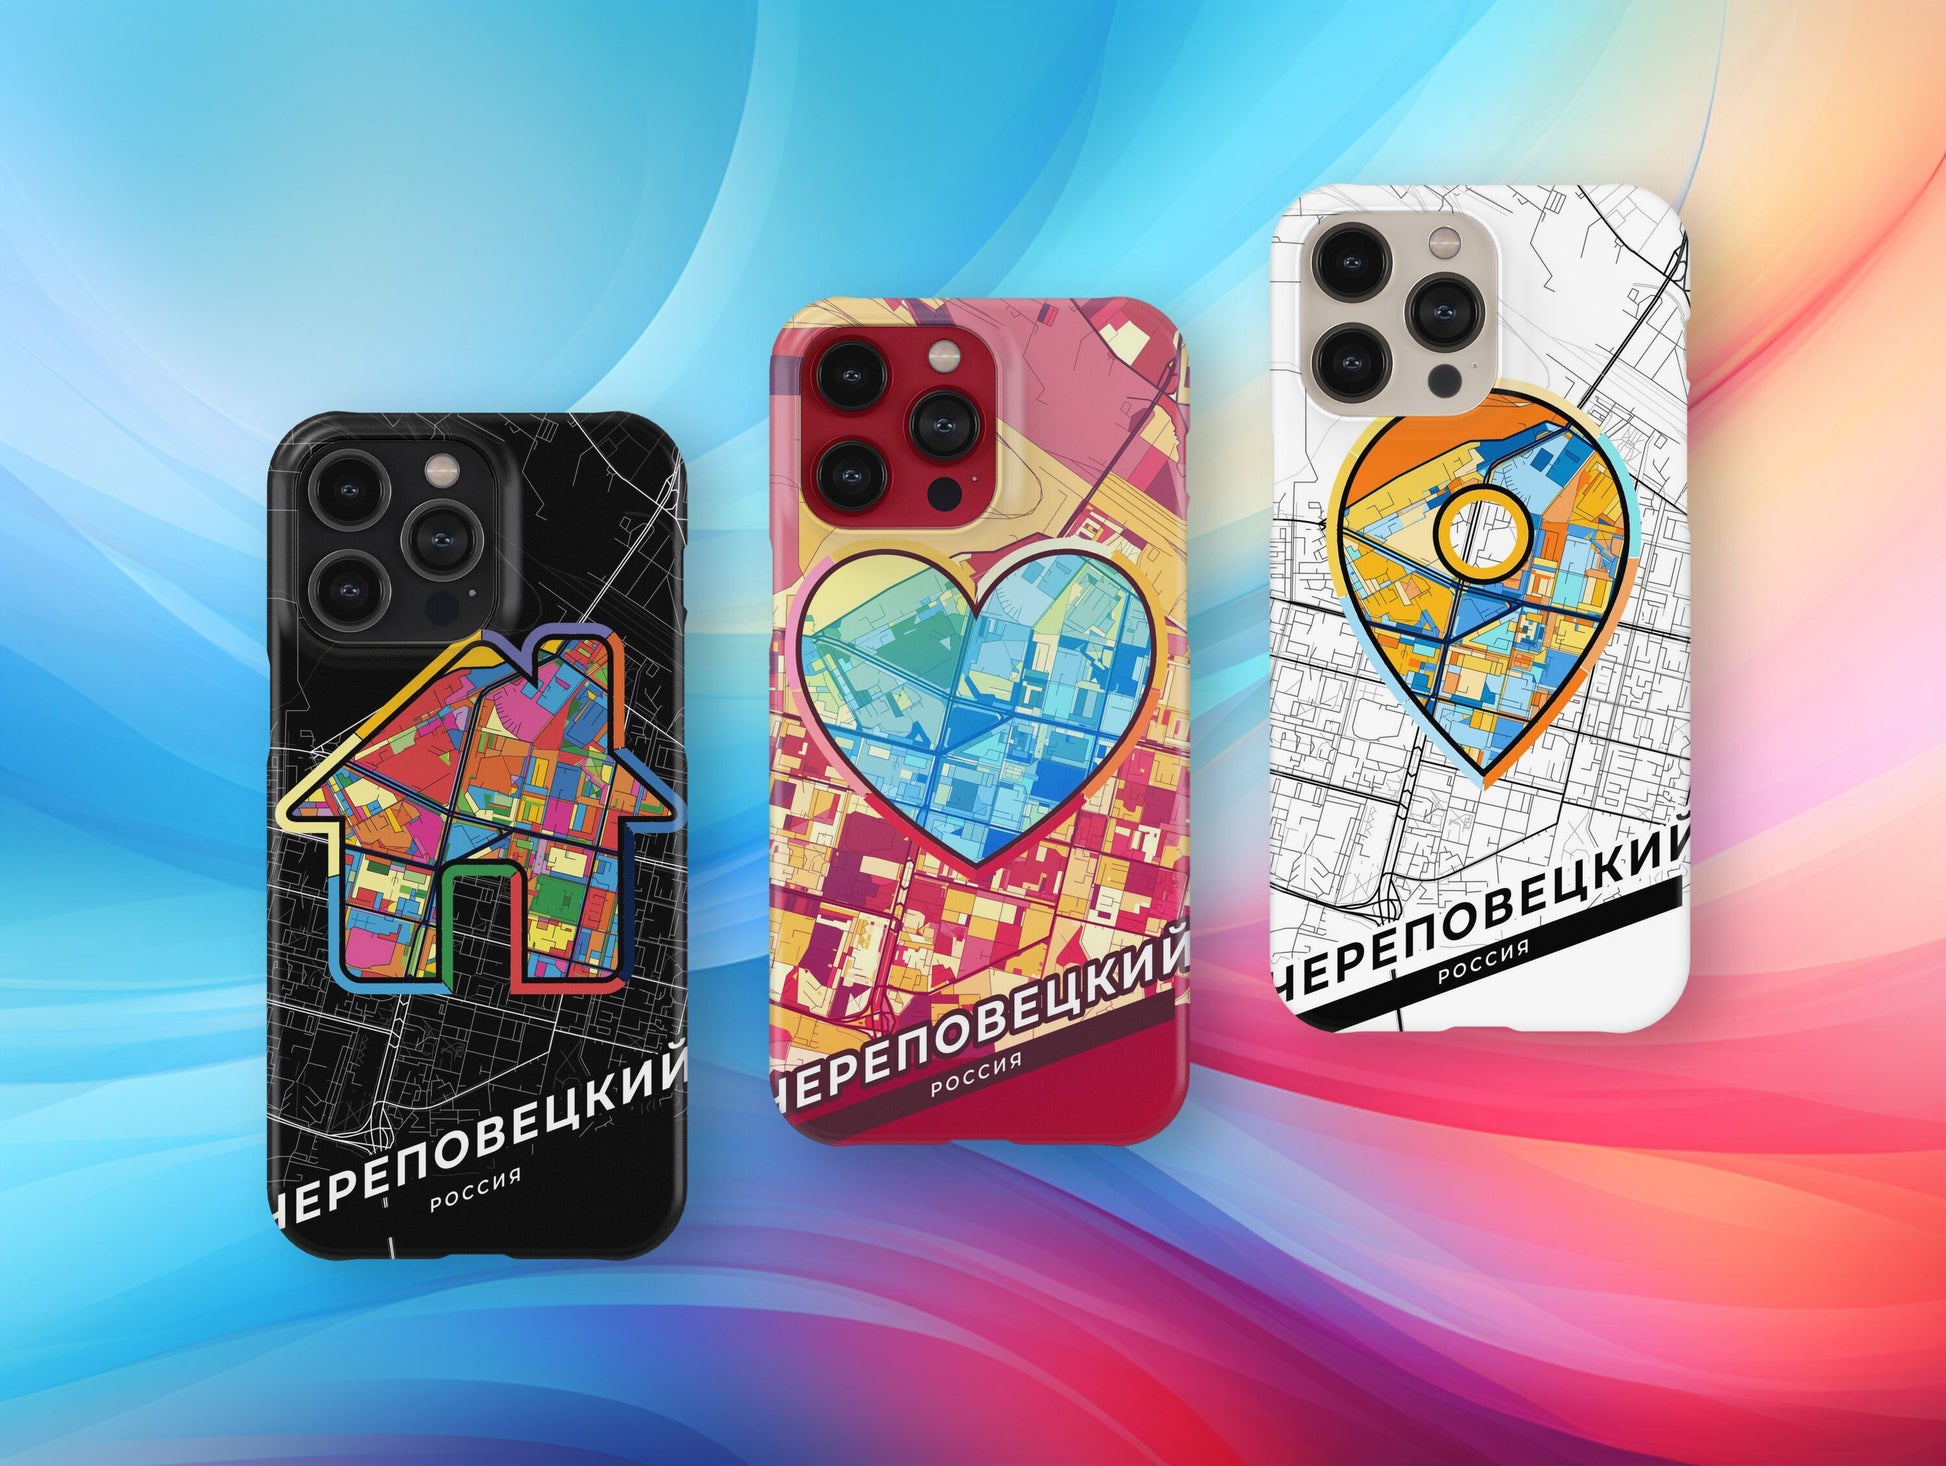 Cherepovets Russia slim phone case with colorful icon. Birthday, wedding or housewarming gift. Couple match cases.